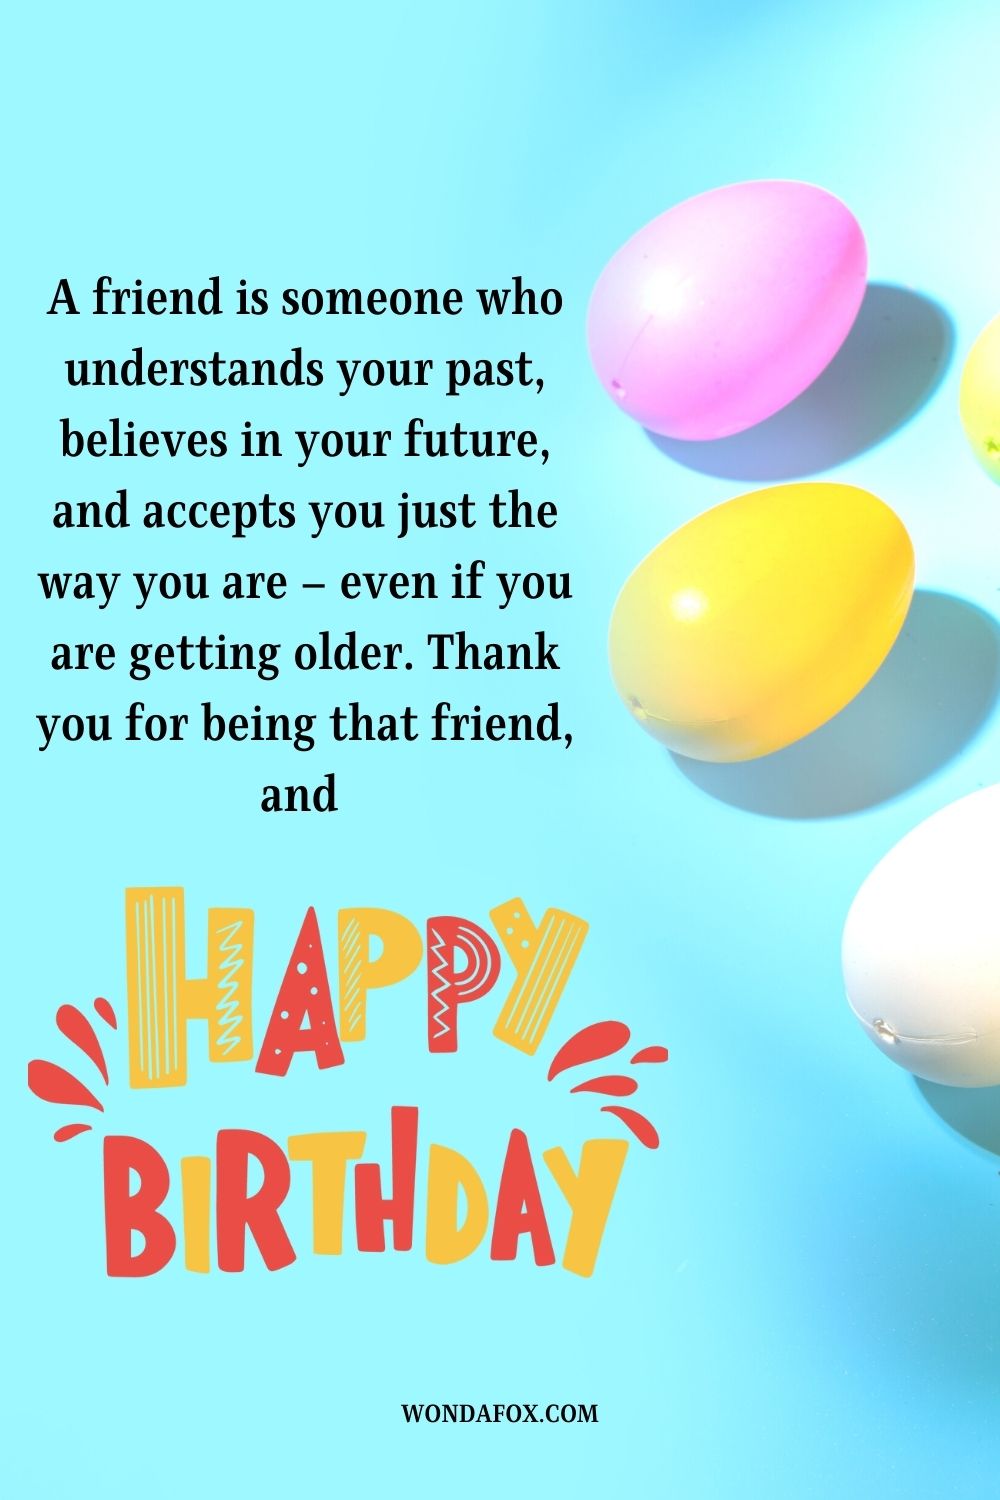 A friend is someone who understands your past, believes in your future, and accepts you just the way you are – even if you are getting older. Thank you for being that friend, and happy birthday.